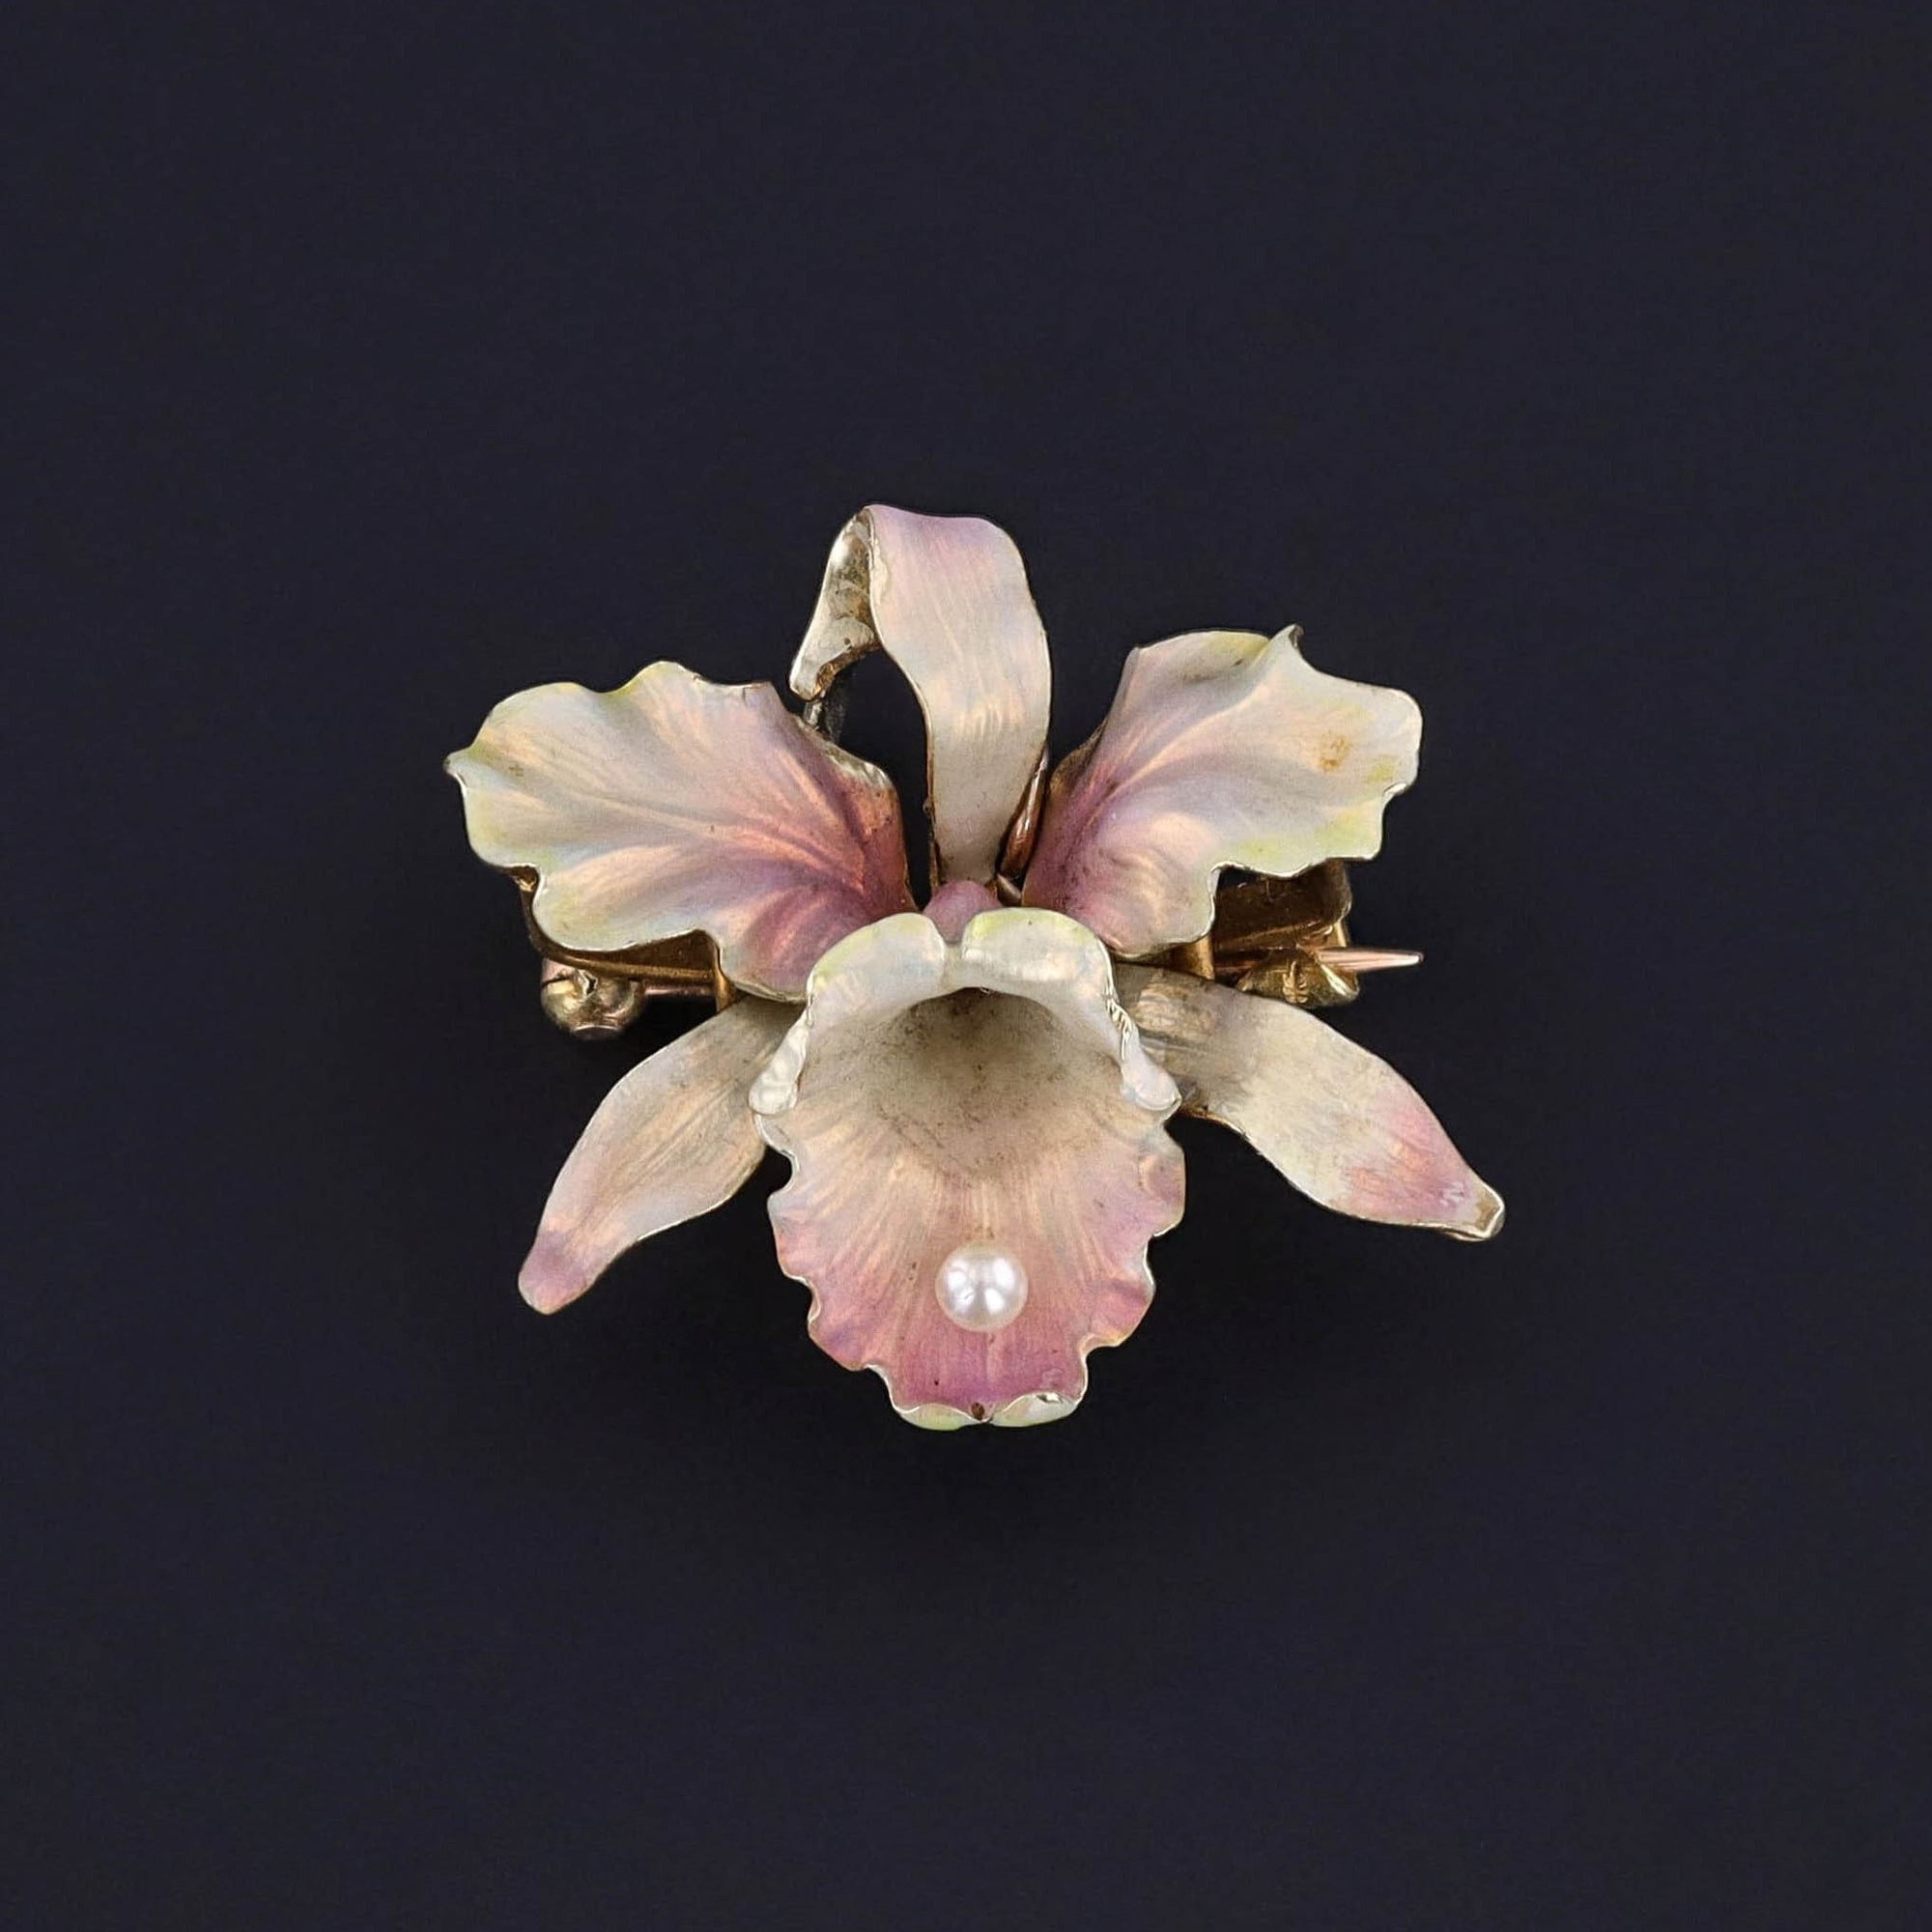 Transport yourself back to the elegant Art Nouveau era with this antique jewel showcasing a 14k gold orchid adorned in iridescent pink enamel. The pin findings bear the makers mark for the renowned Whiteside & Blank of Newark, NJ.